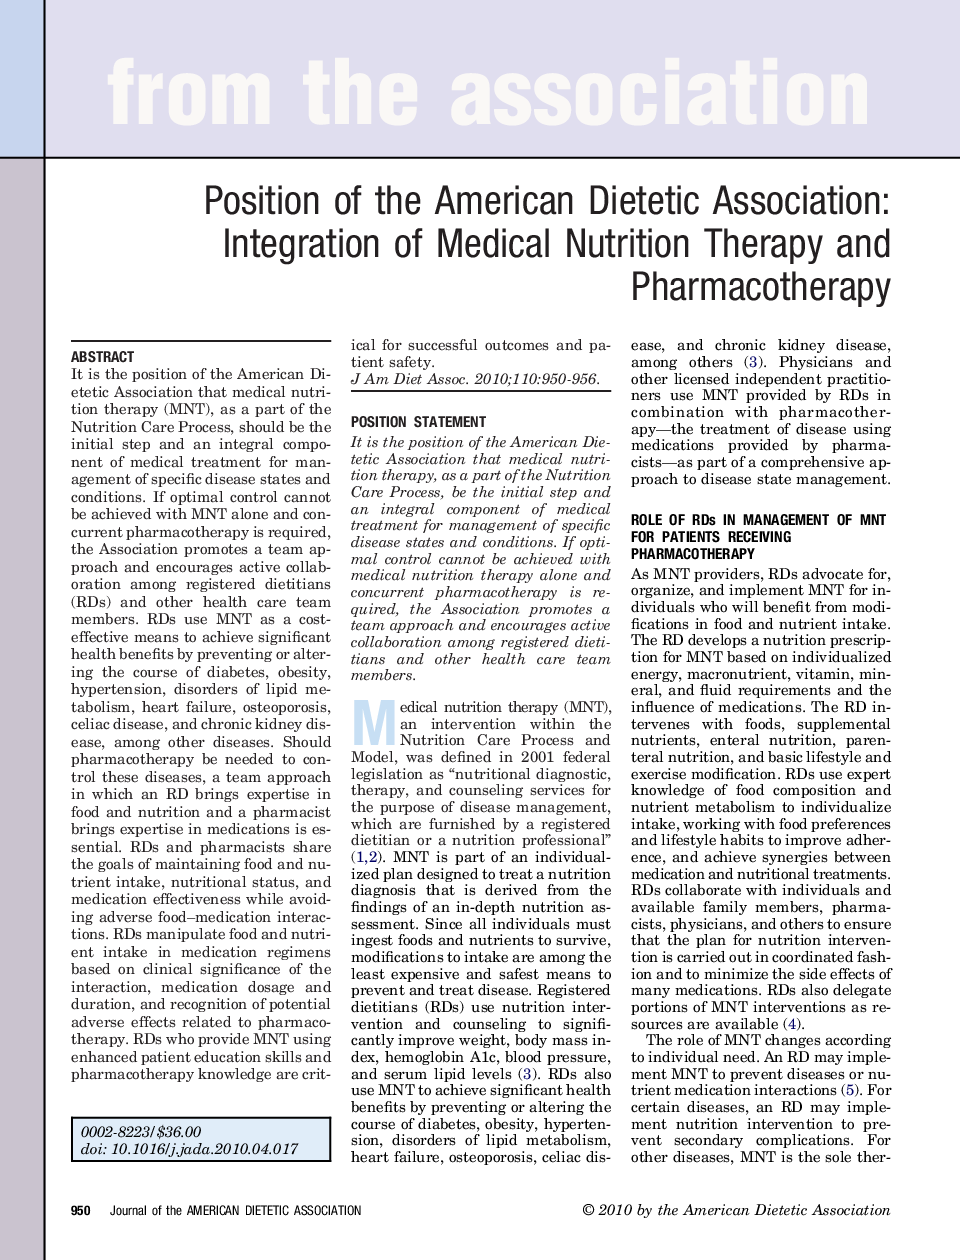 Position of the American Dietetic Association: Integration of Medical Nutrition Therapy and Pharmacotherapy